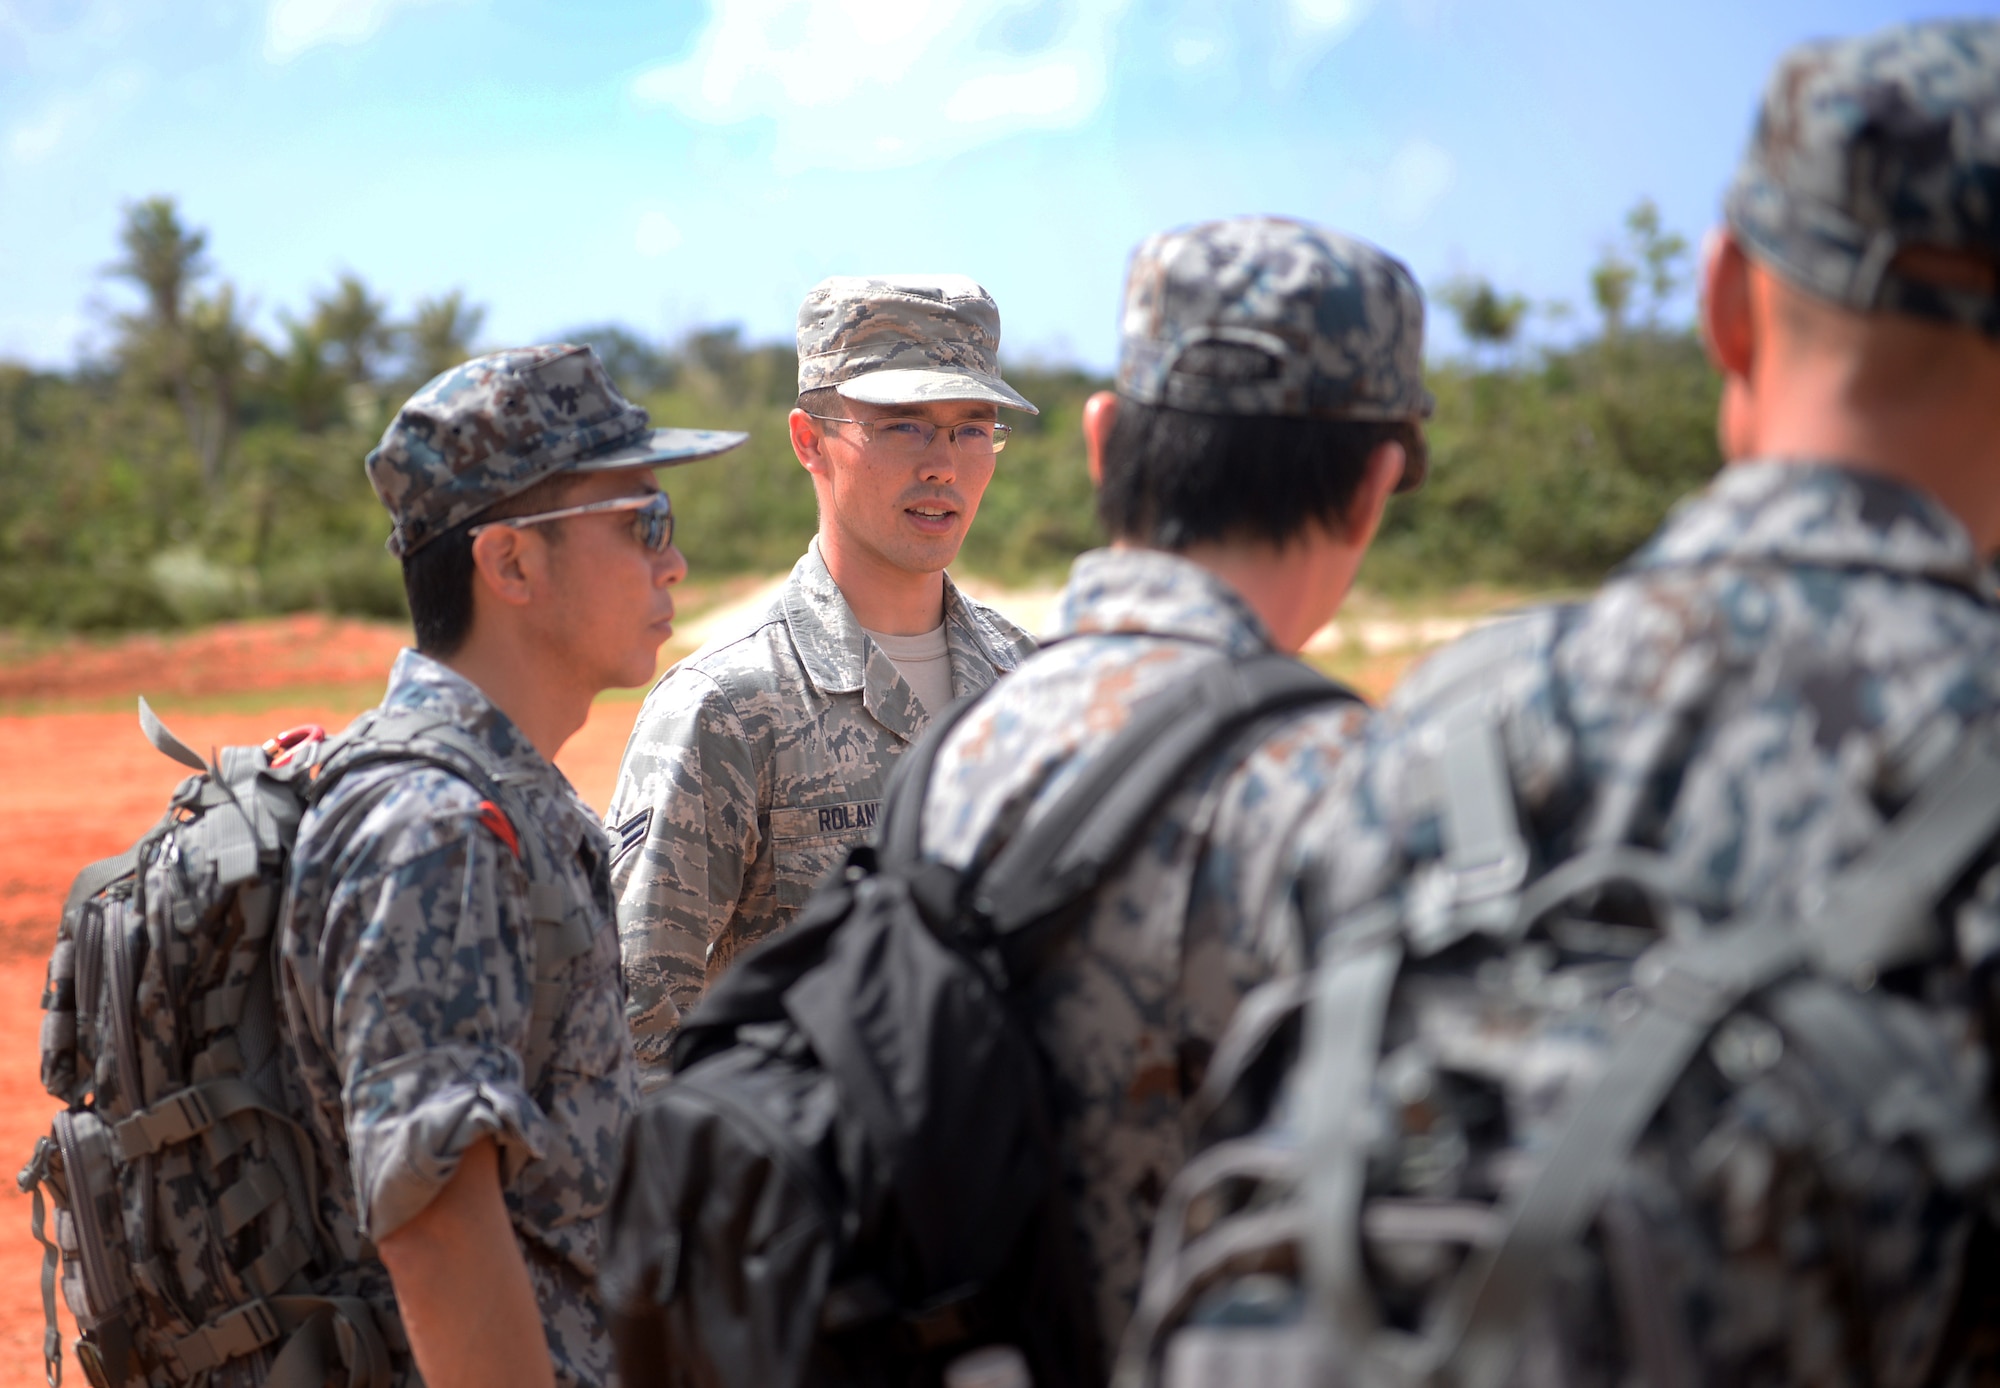 U.S. Air Force Airman 1st Class Daniel Roland, 792nd Intelligence Support Squadron cyber system operator, Joint Base Pearl Harbor-Hickam, Hawaii, translates information from 554th RED HORSE Squadron Silver Flag instructors to Japan Air Self-Defense Force engineers during Partner Nation Silver Flag, Feb. 14, 2016, at Andersen Air Force Base, Guam. Translators were selected throughout the Pacific Air Forces to help with the language barrier presented by the multiple nations involved in the PNSF. (U.S. Air Force photo by Senior Airman Joshua Smoot/Released)